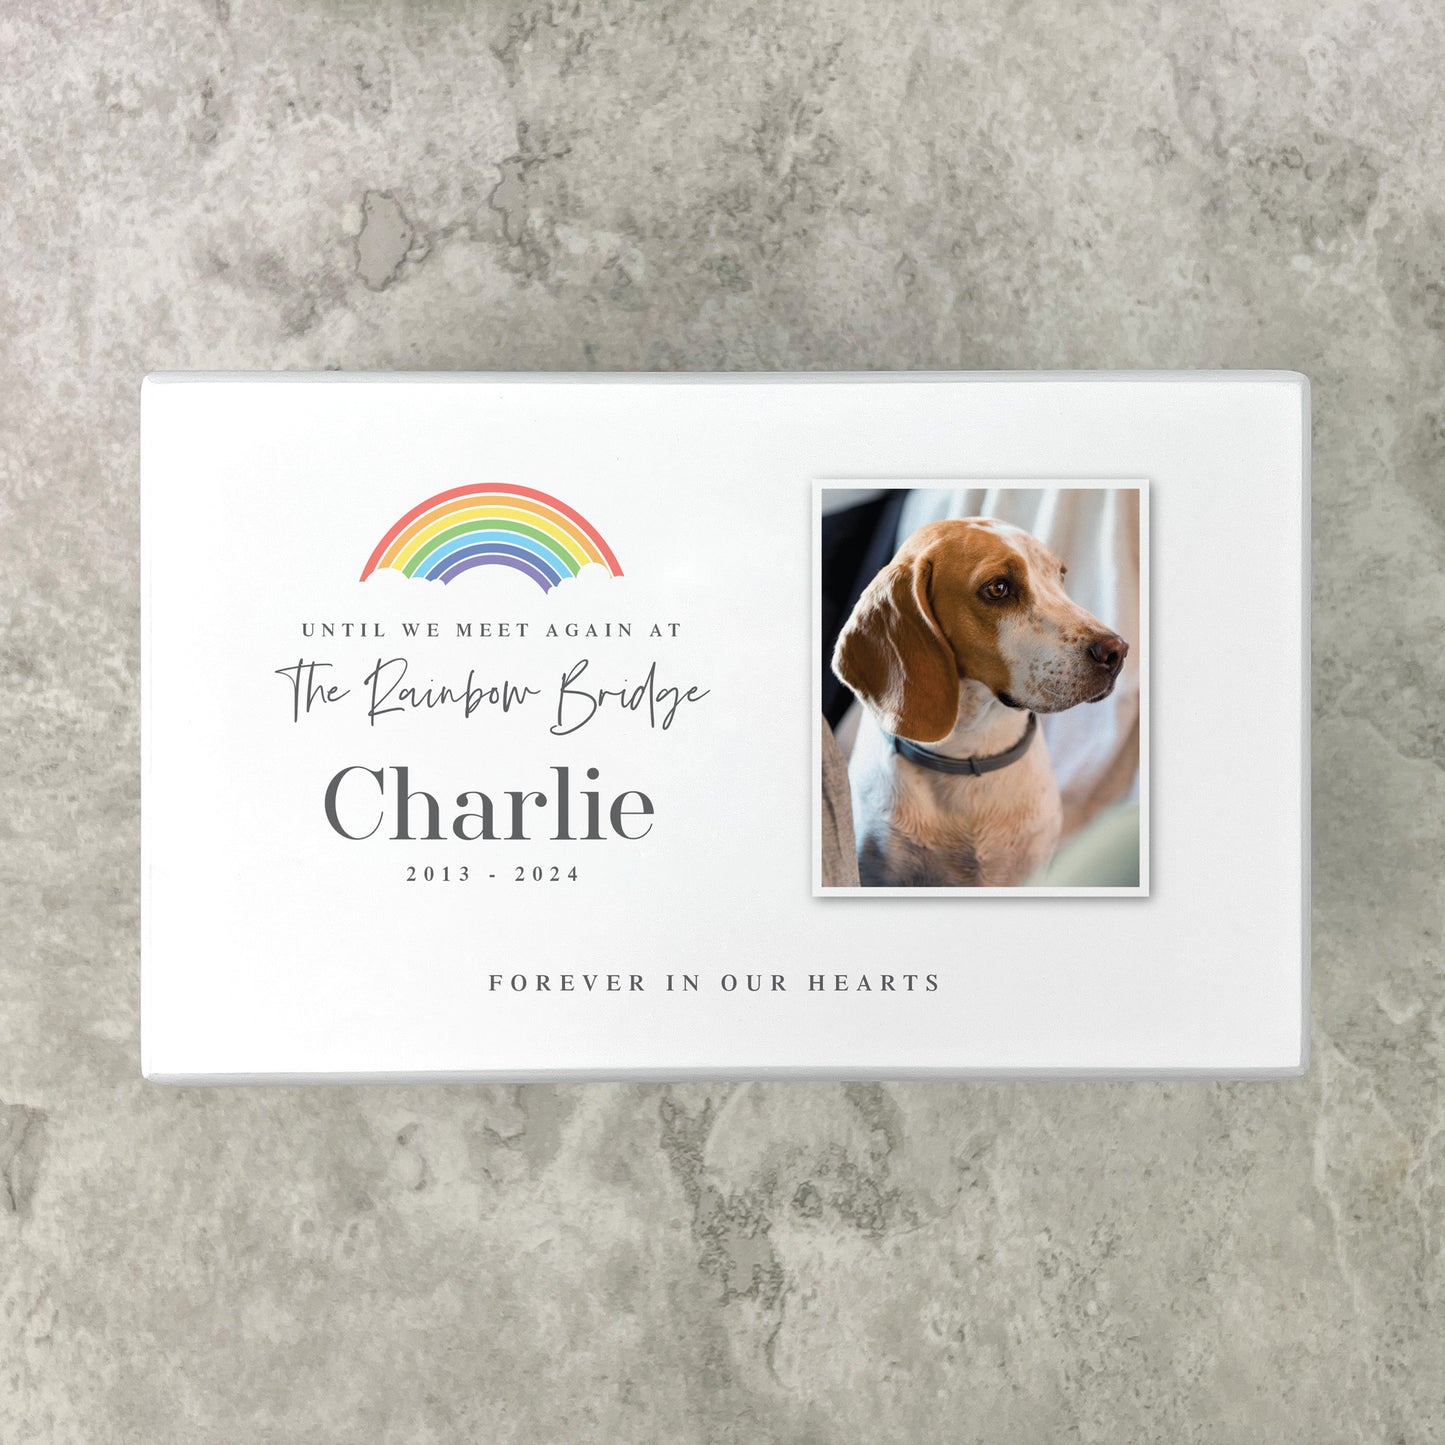 Personalised Until We Meet Again Rainbow Bridge Photo Large Cremation Urn For Pets Ashes | 1.44 Litres